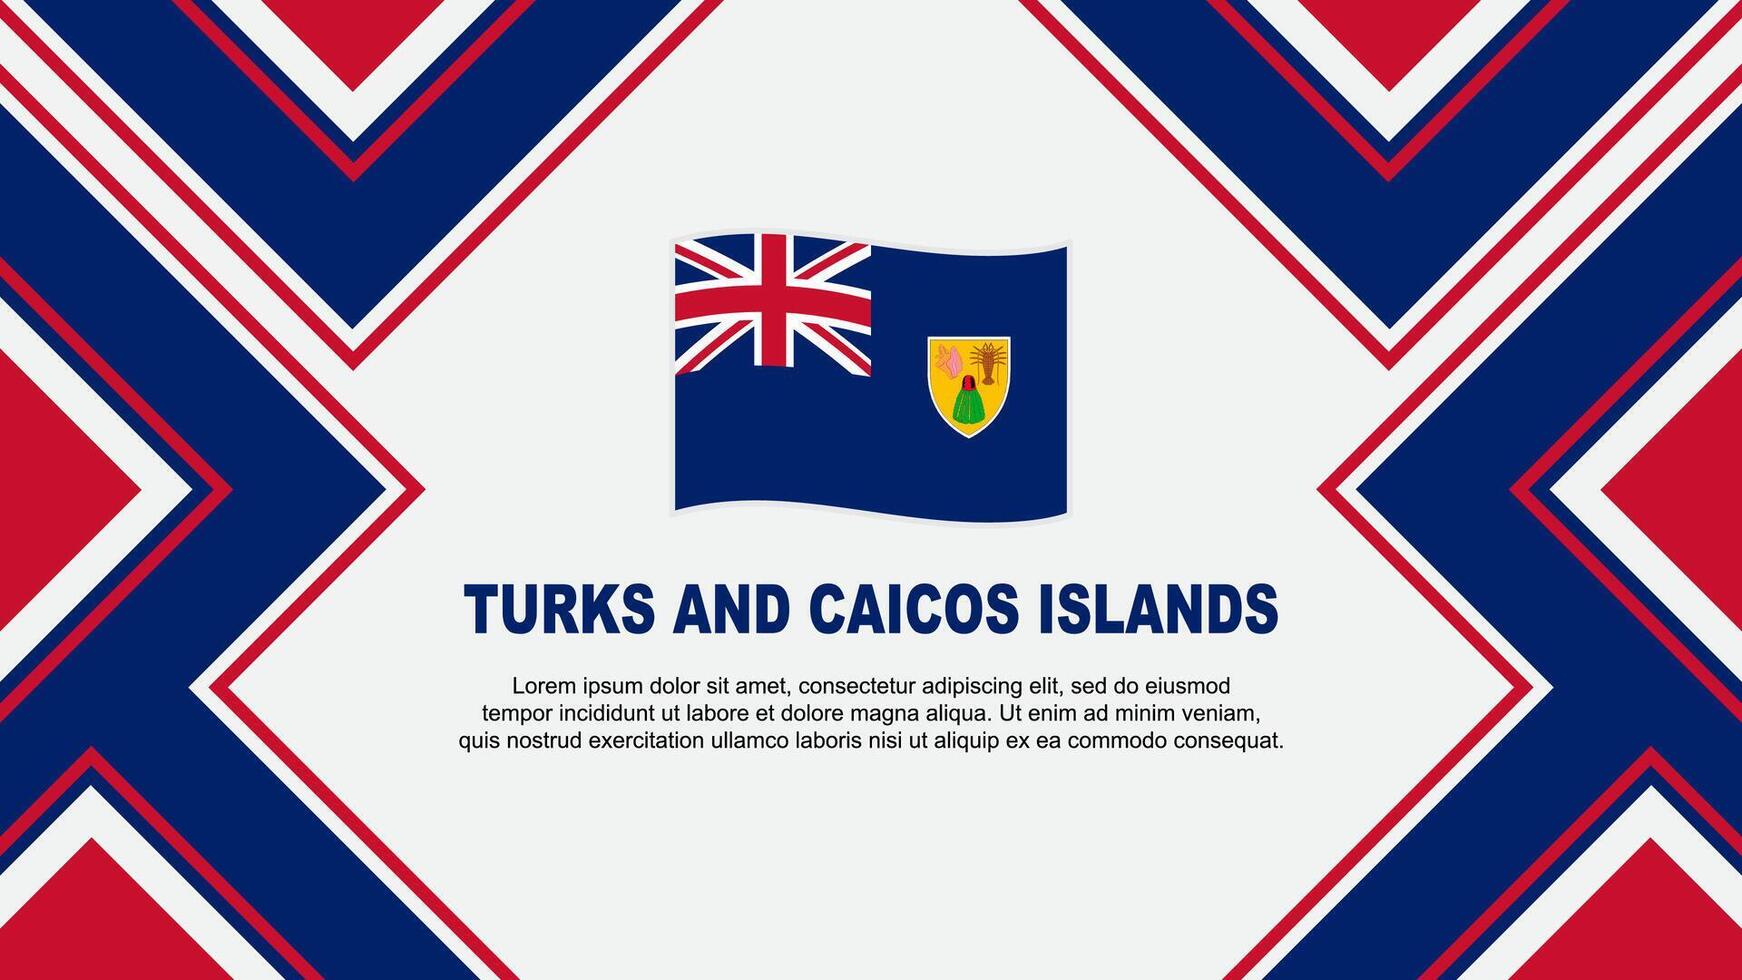 Turks And Caicos Islands Flag Abstract Background Design Template. Turks And Caicos Islands Independence Day Banner Wallpaper Vector Illustration. Vector